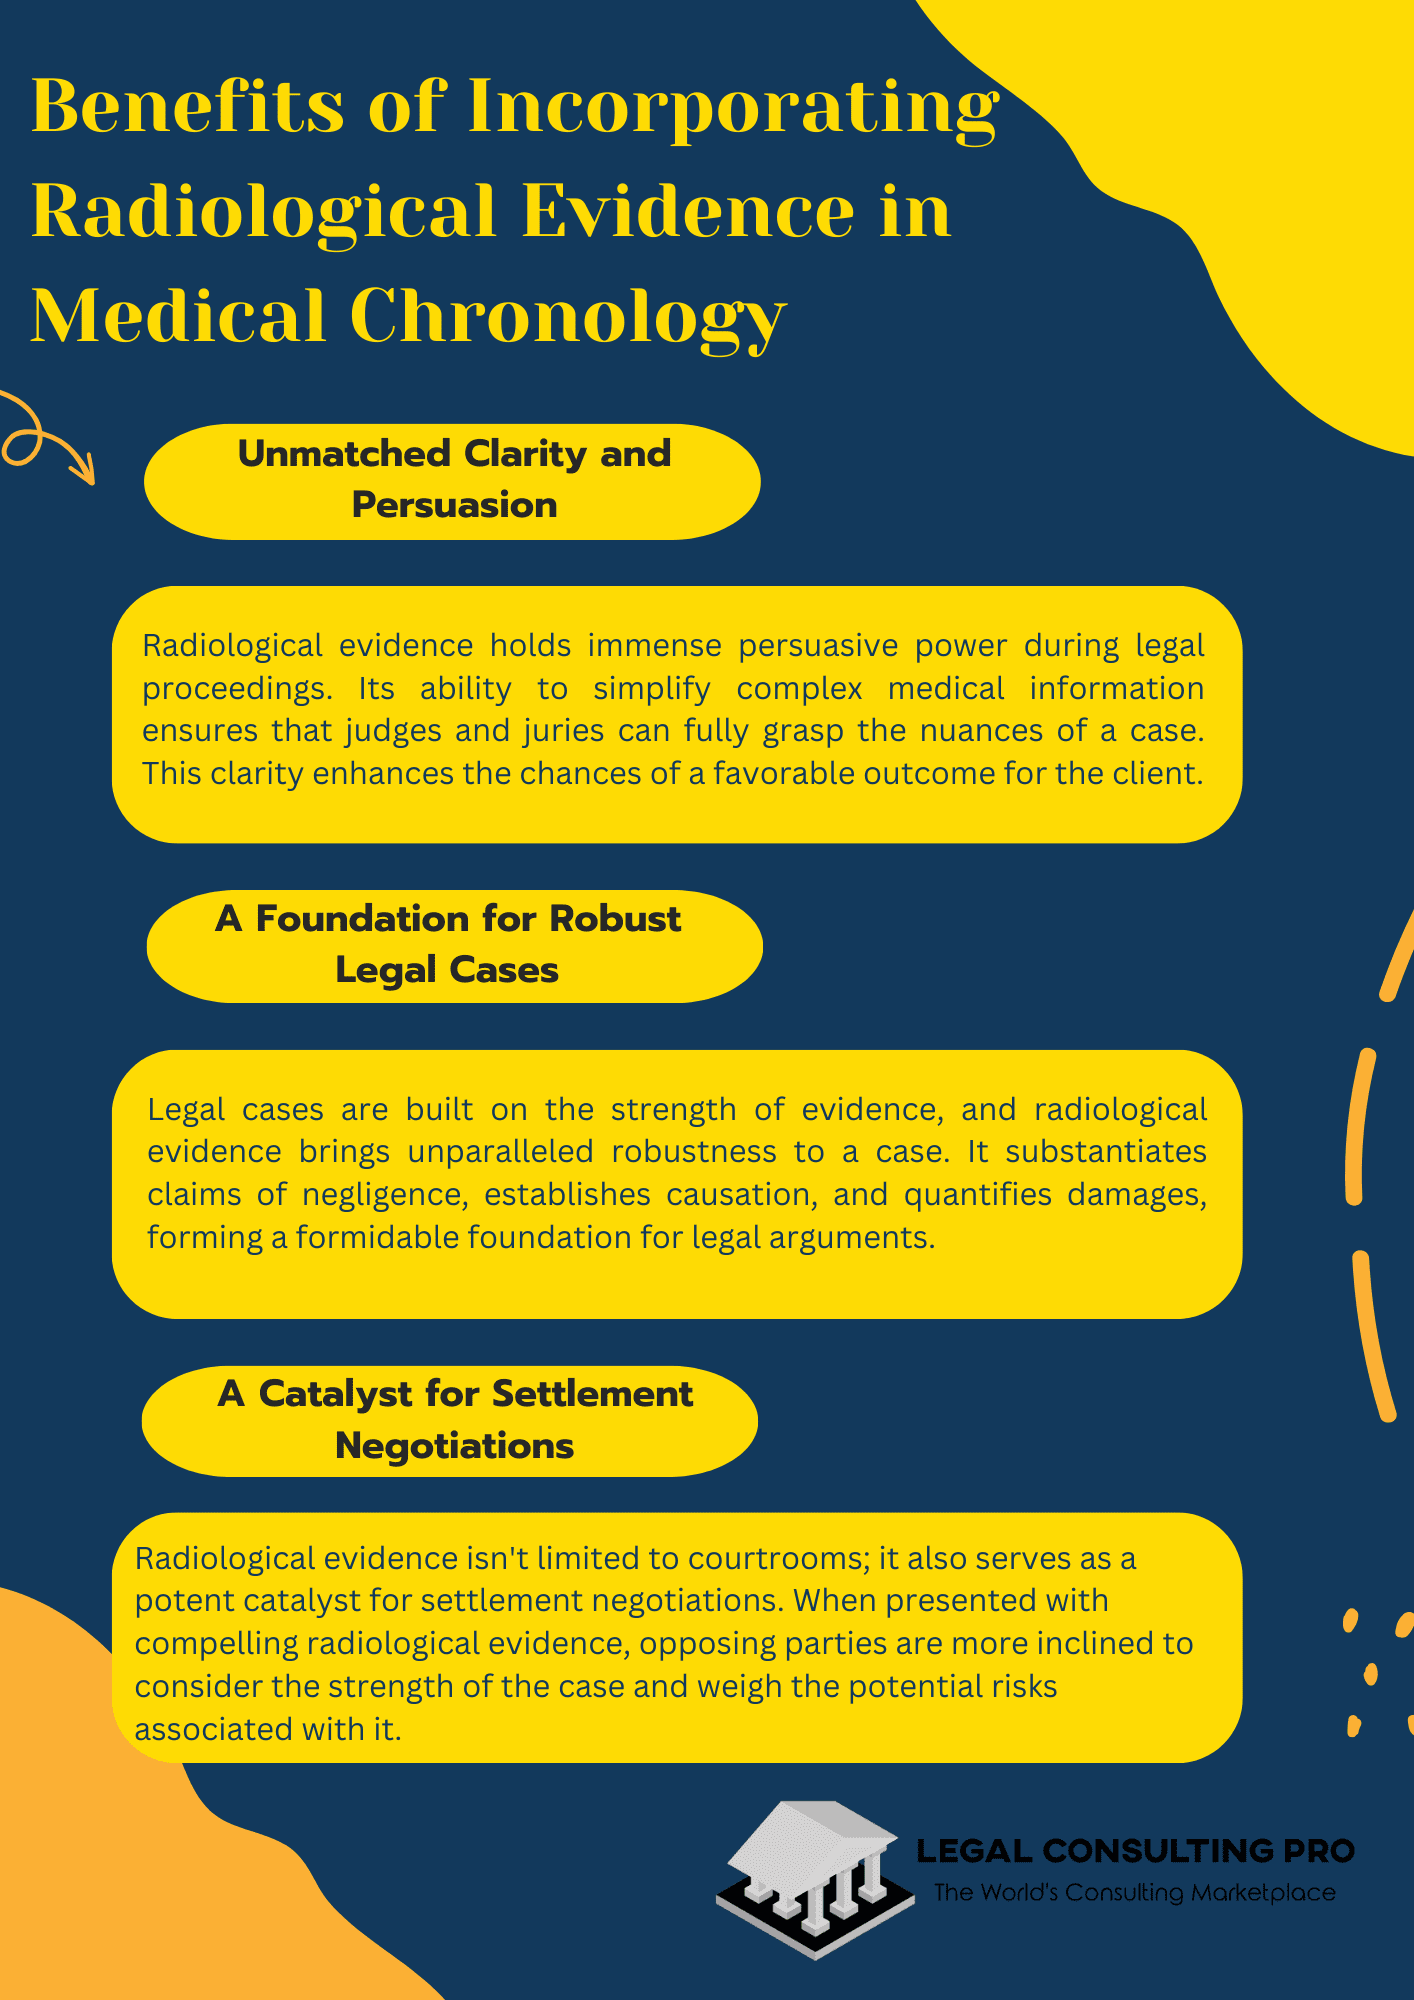 Benefits of Incorporating Radiological Evidence in Medical Chronology Infographics